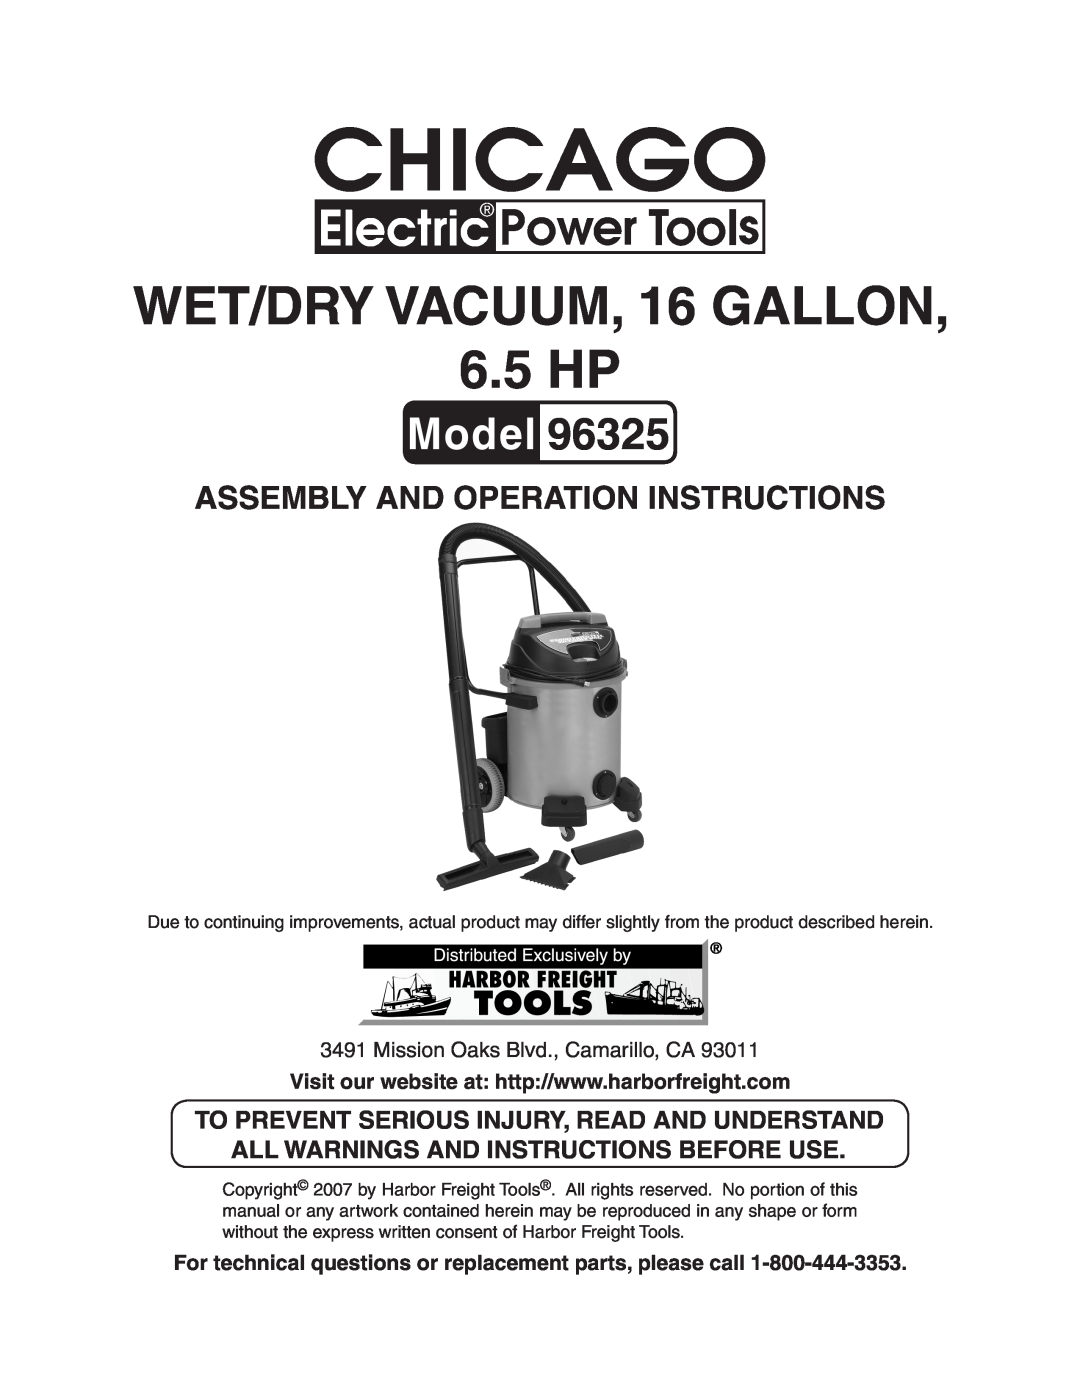 Harbor Freight Tools 96325 manual To prevent serious injury, read and understand, all warnings and instructions before use 